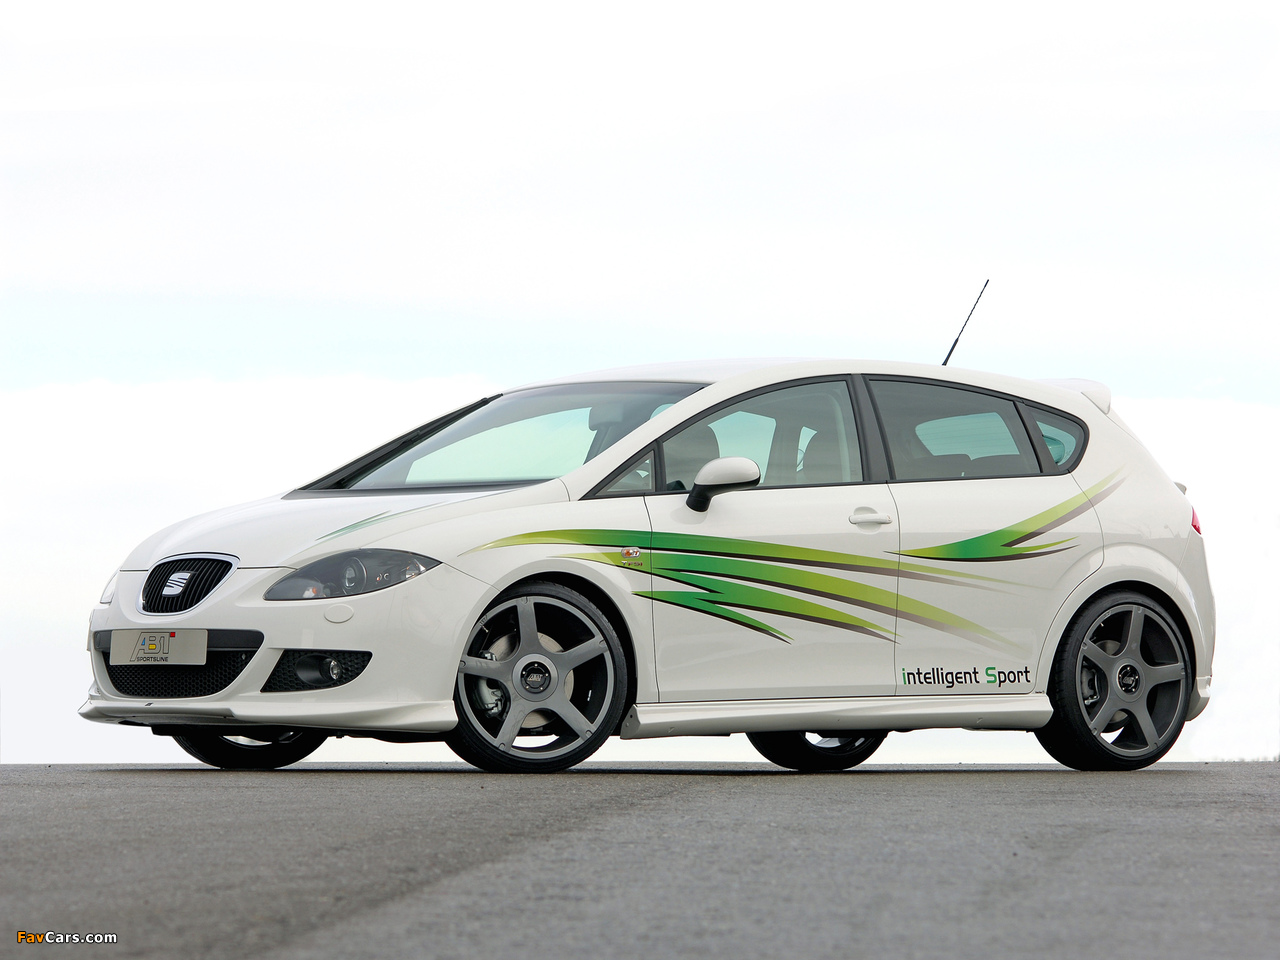 Images of ABT Seat Leon iS (1280 x 960)